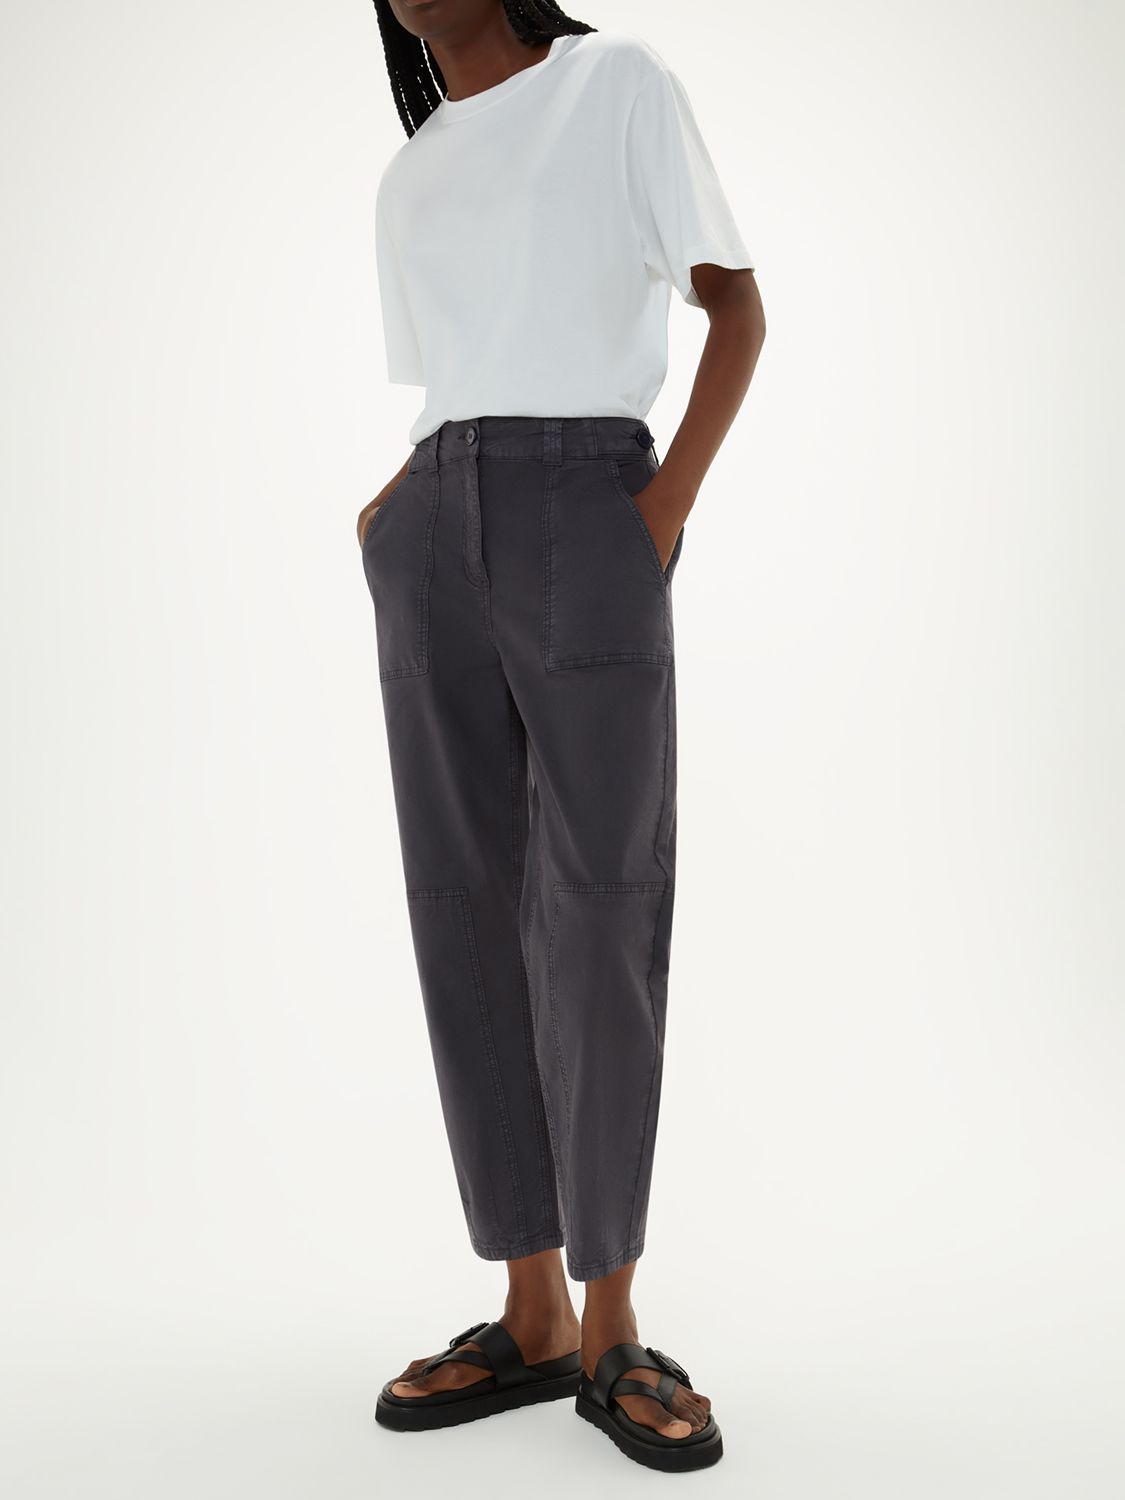 Whistles Alice Pocket Detail Casual Trousers, Navy at John Lewis & Partners